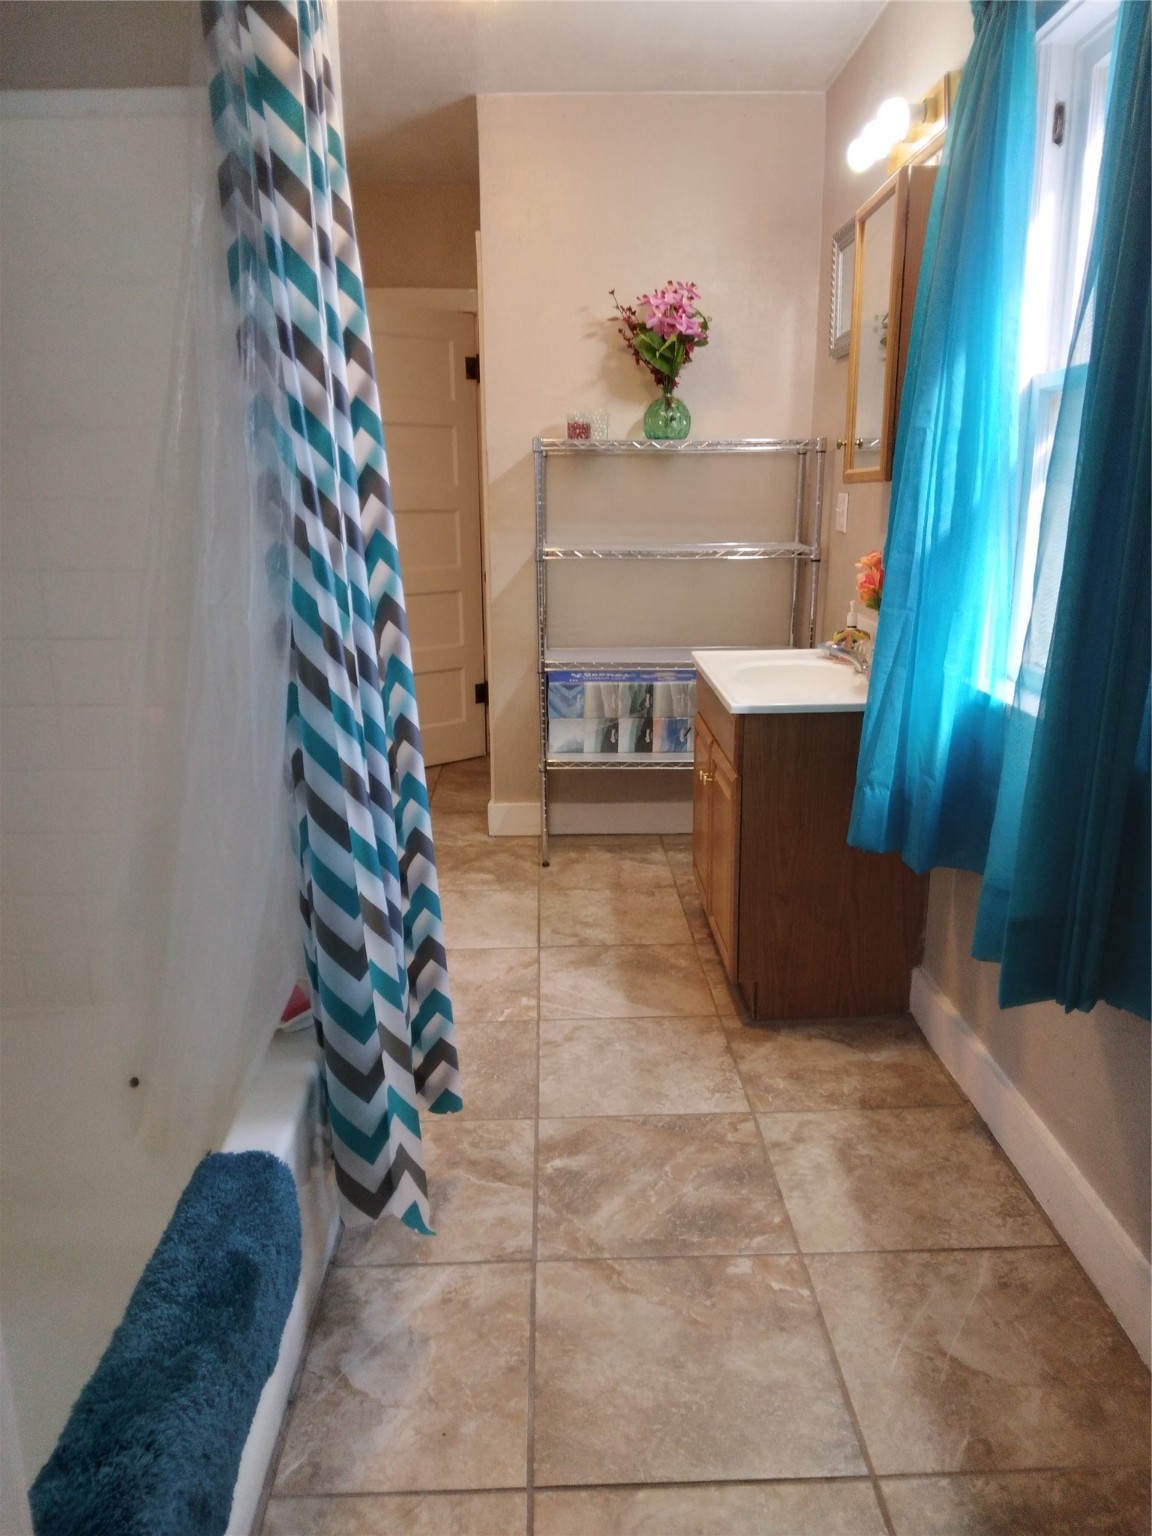 221 Grand Avenue, Las Vegas, New Mexico 87701, 2 Bedrooms Bedrooms, ,1 BathroomBathrooms,Residential,For Sale,221 Grand Avenue,202233039